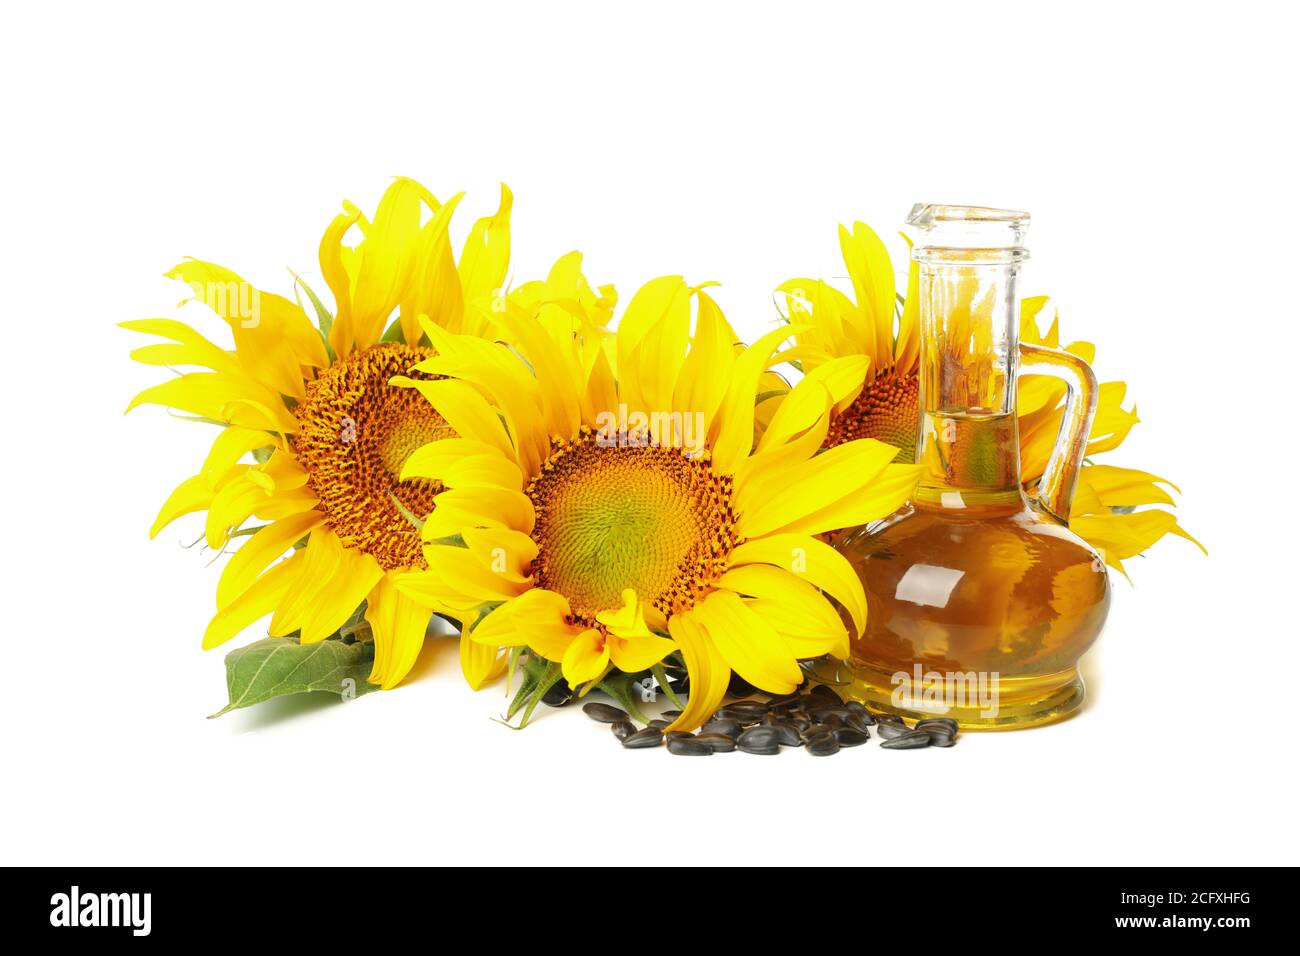 Sunflower, seeds and oil isolated on white background Stock Photo